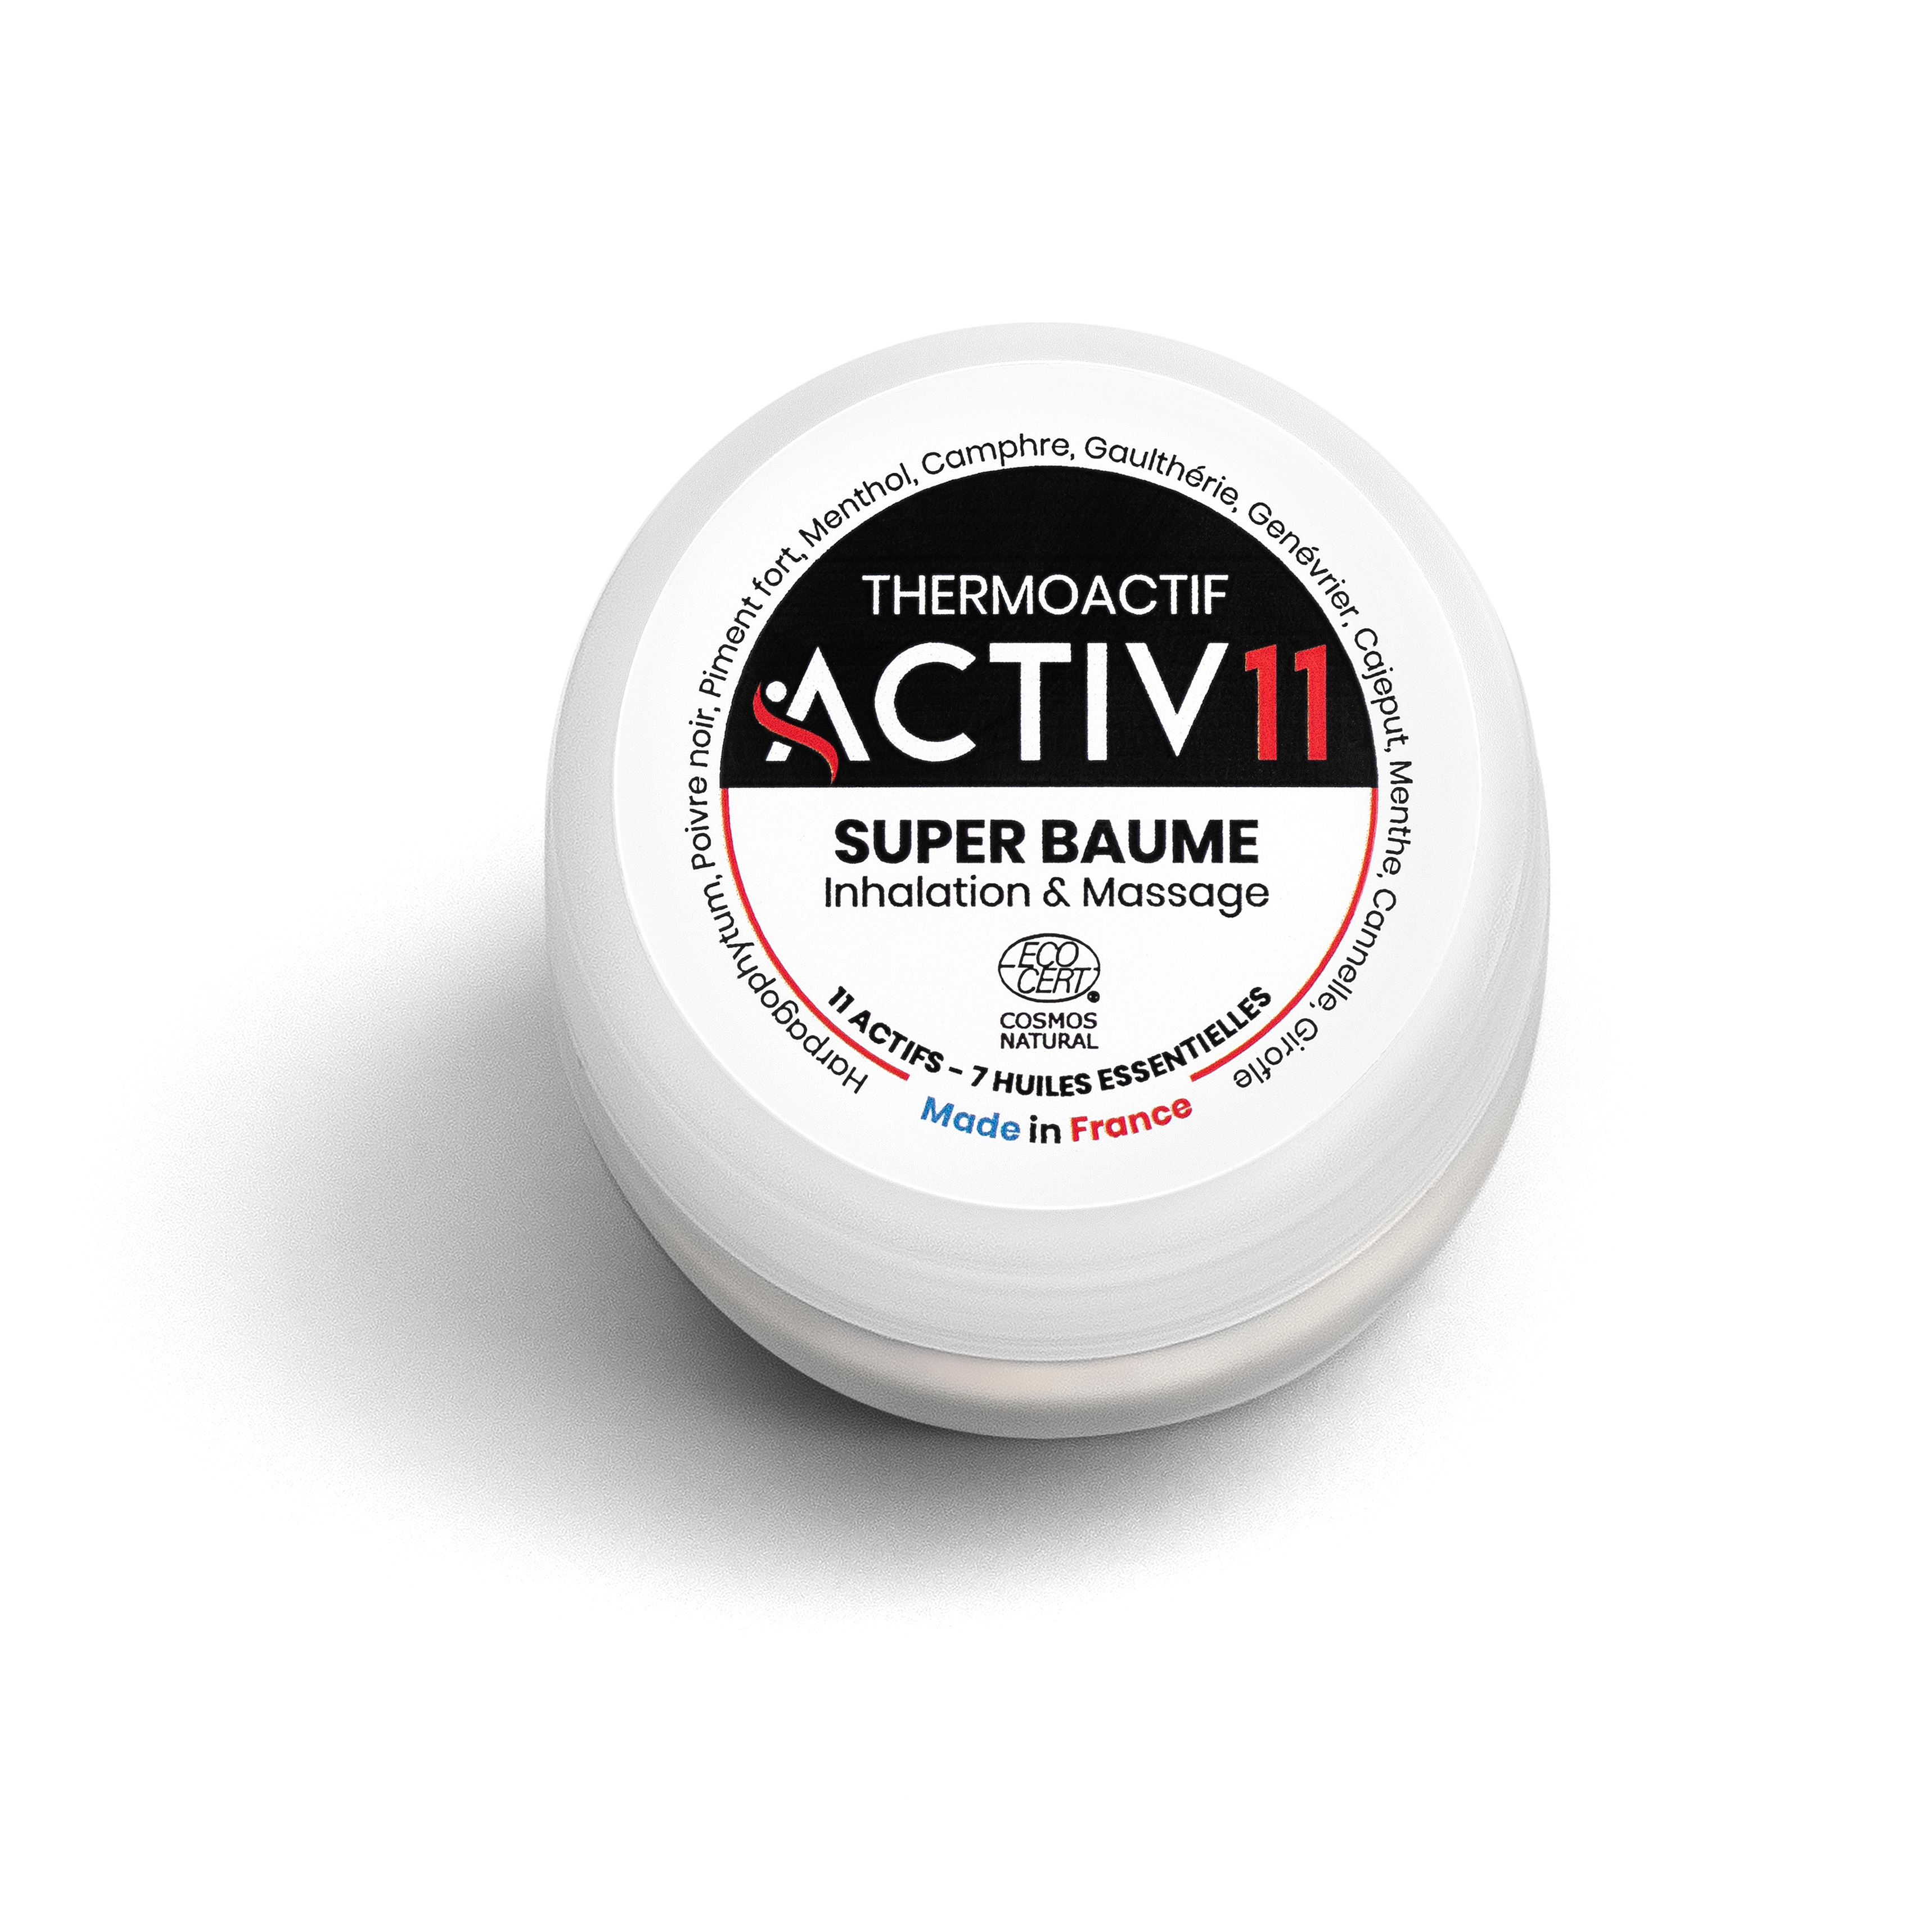 Activ11 Super Baume Thermoactif